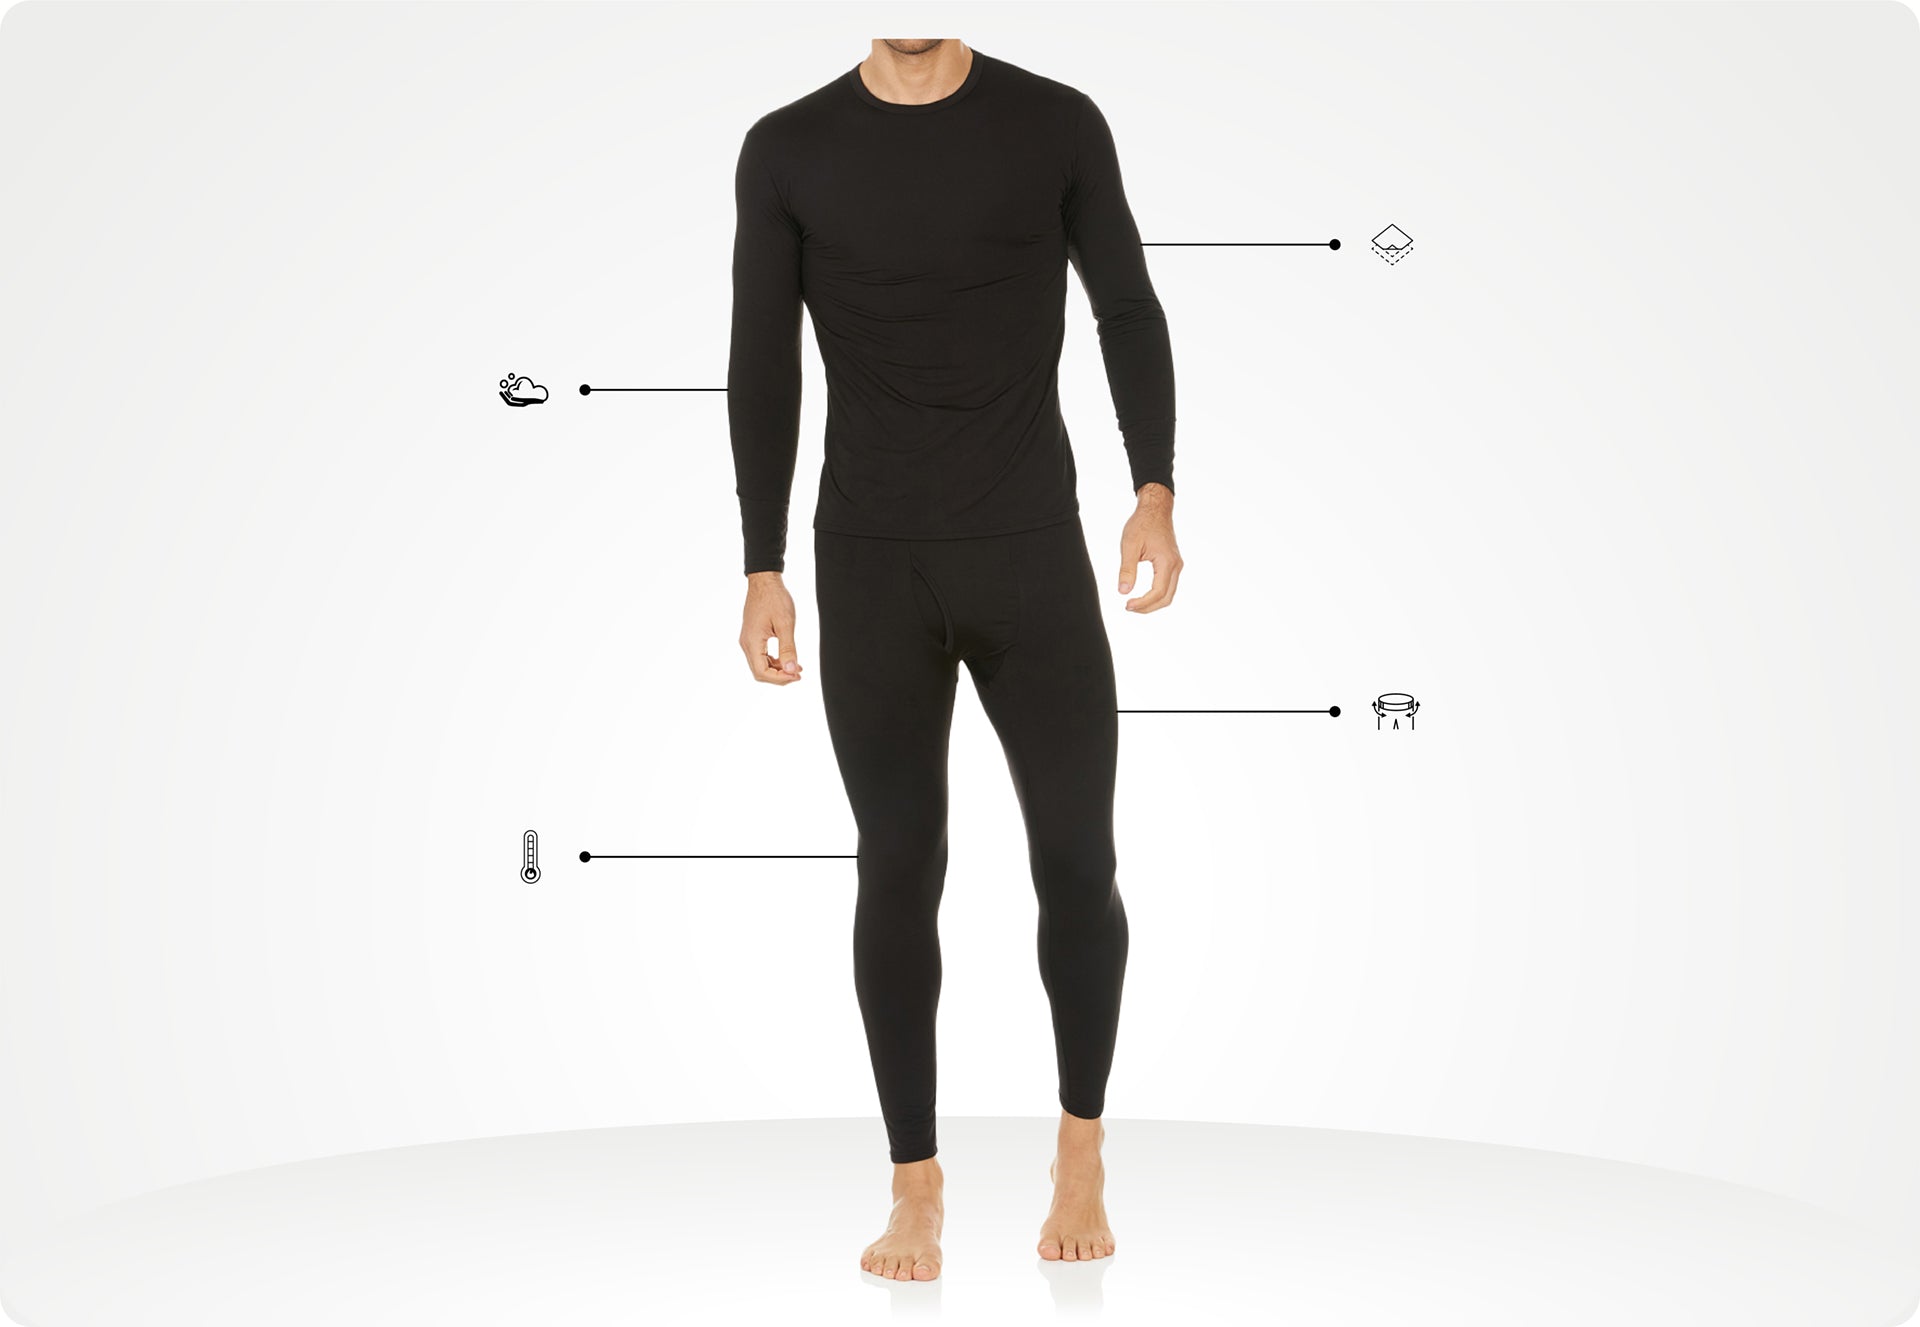 Thermal Underwear for Women – How it is Designed with the Woman in Min–  Thermajane